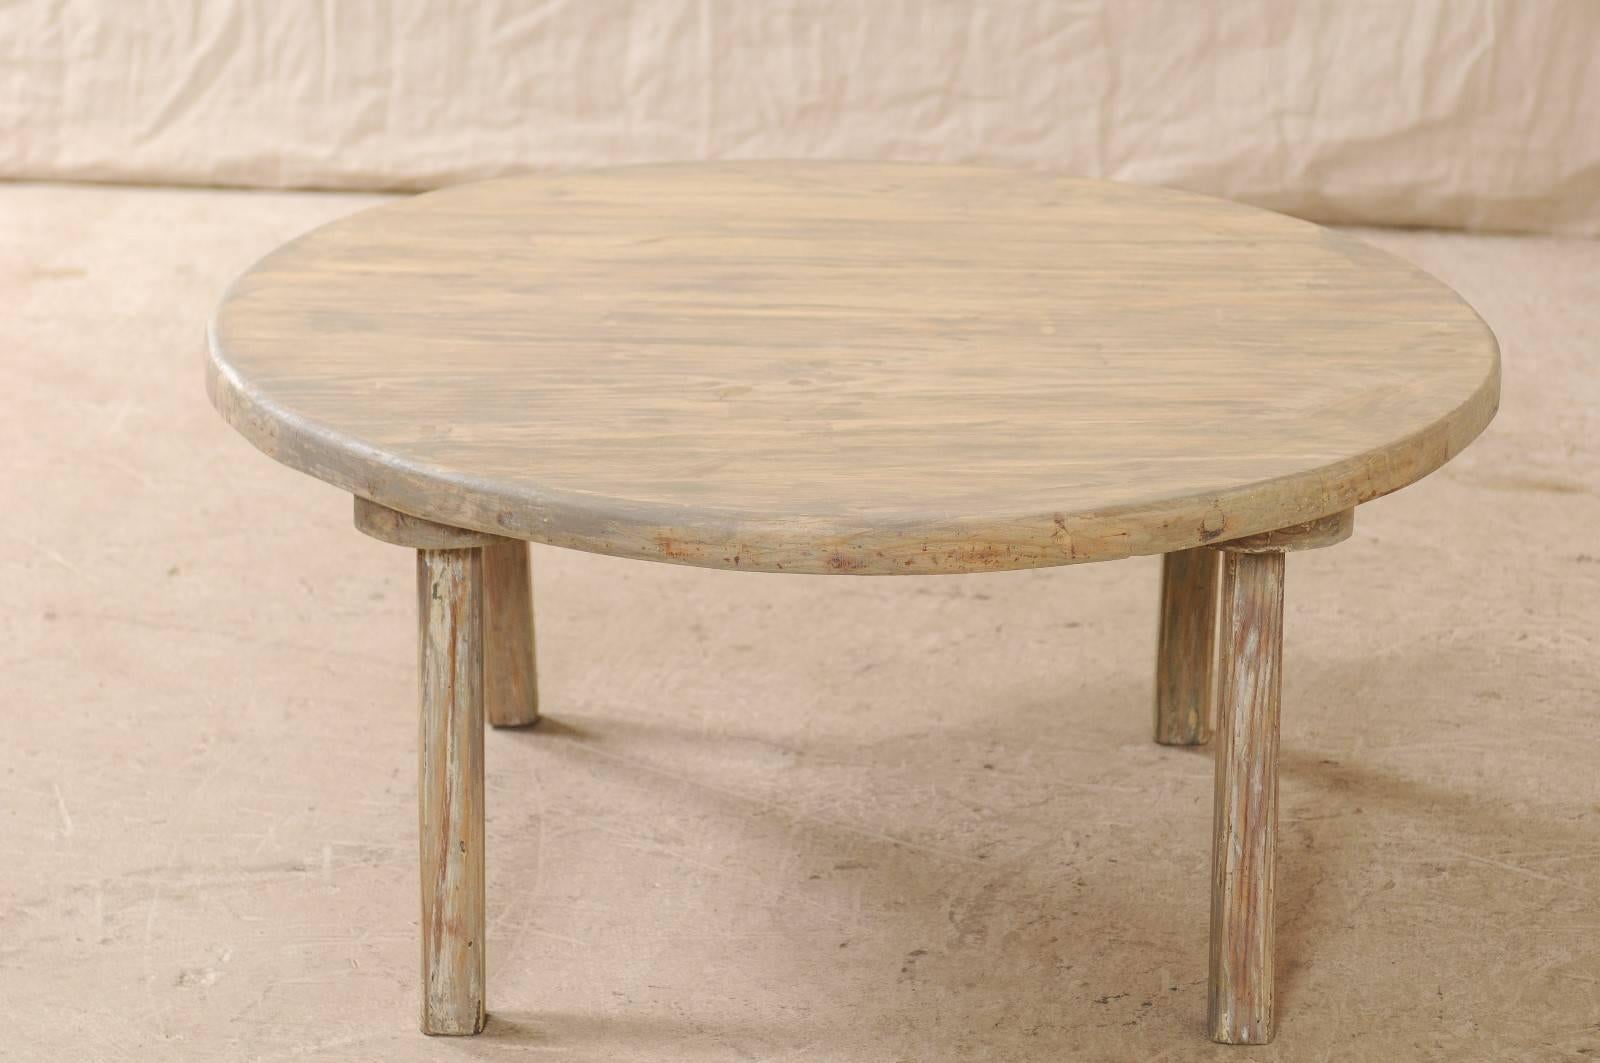 20th Century Vintage Rustic Painted Wood Coffee Table Washed in Muted Grey and Cream Colors